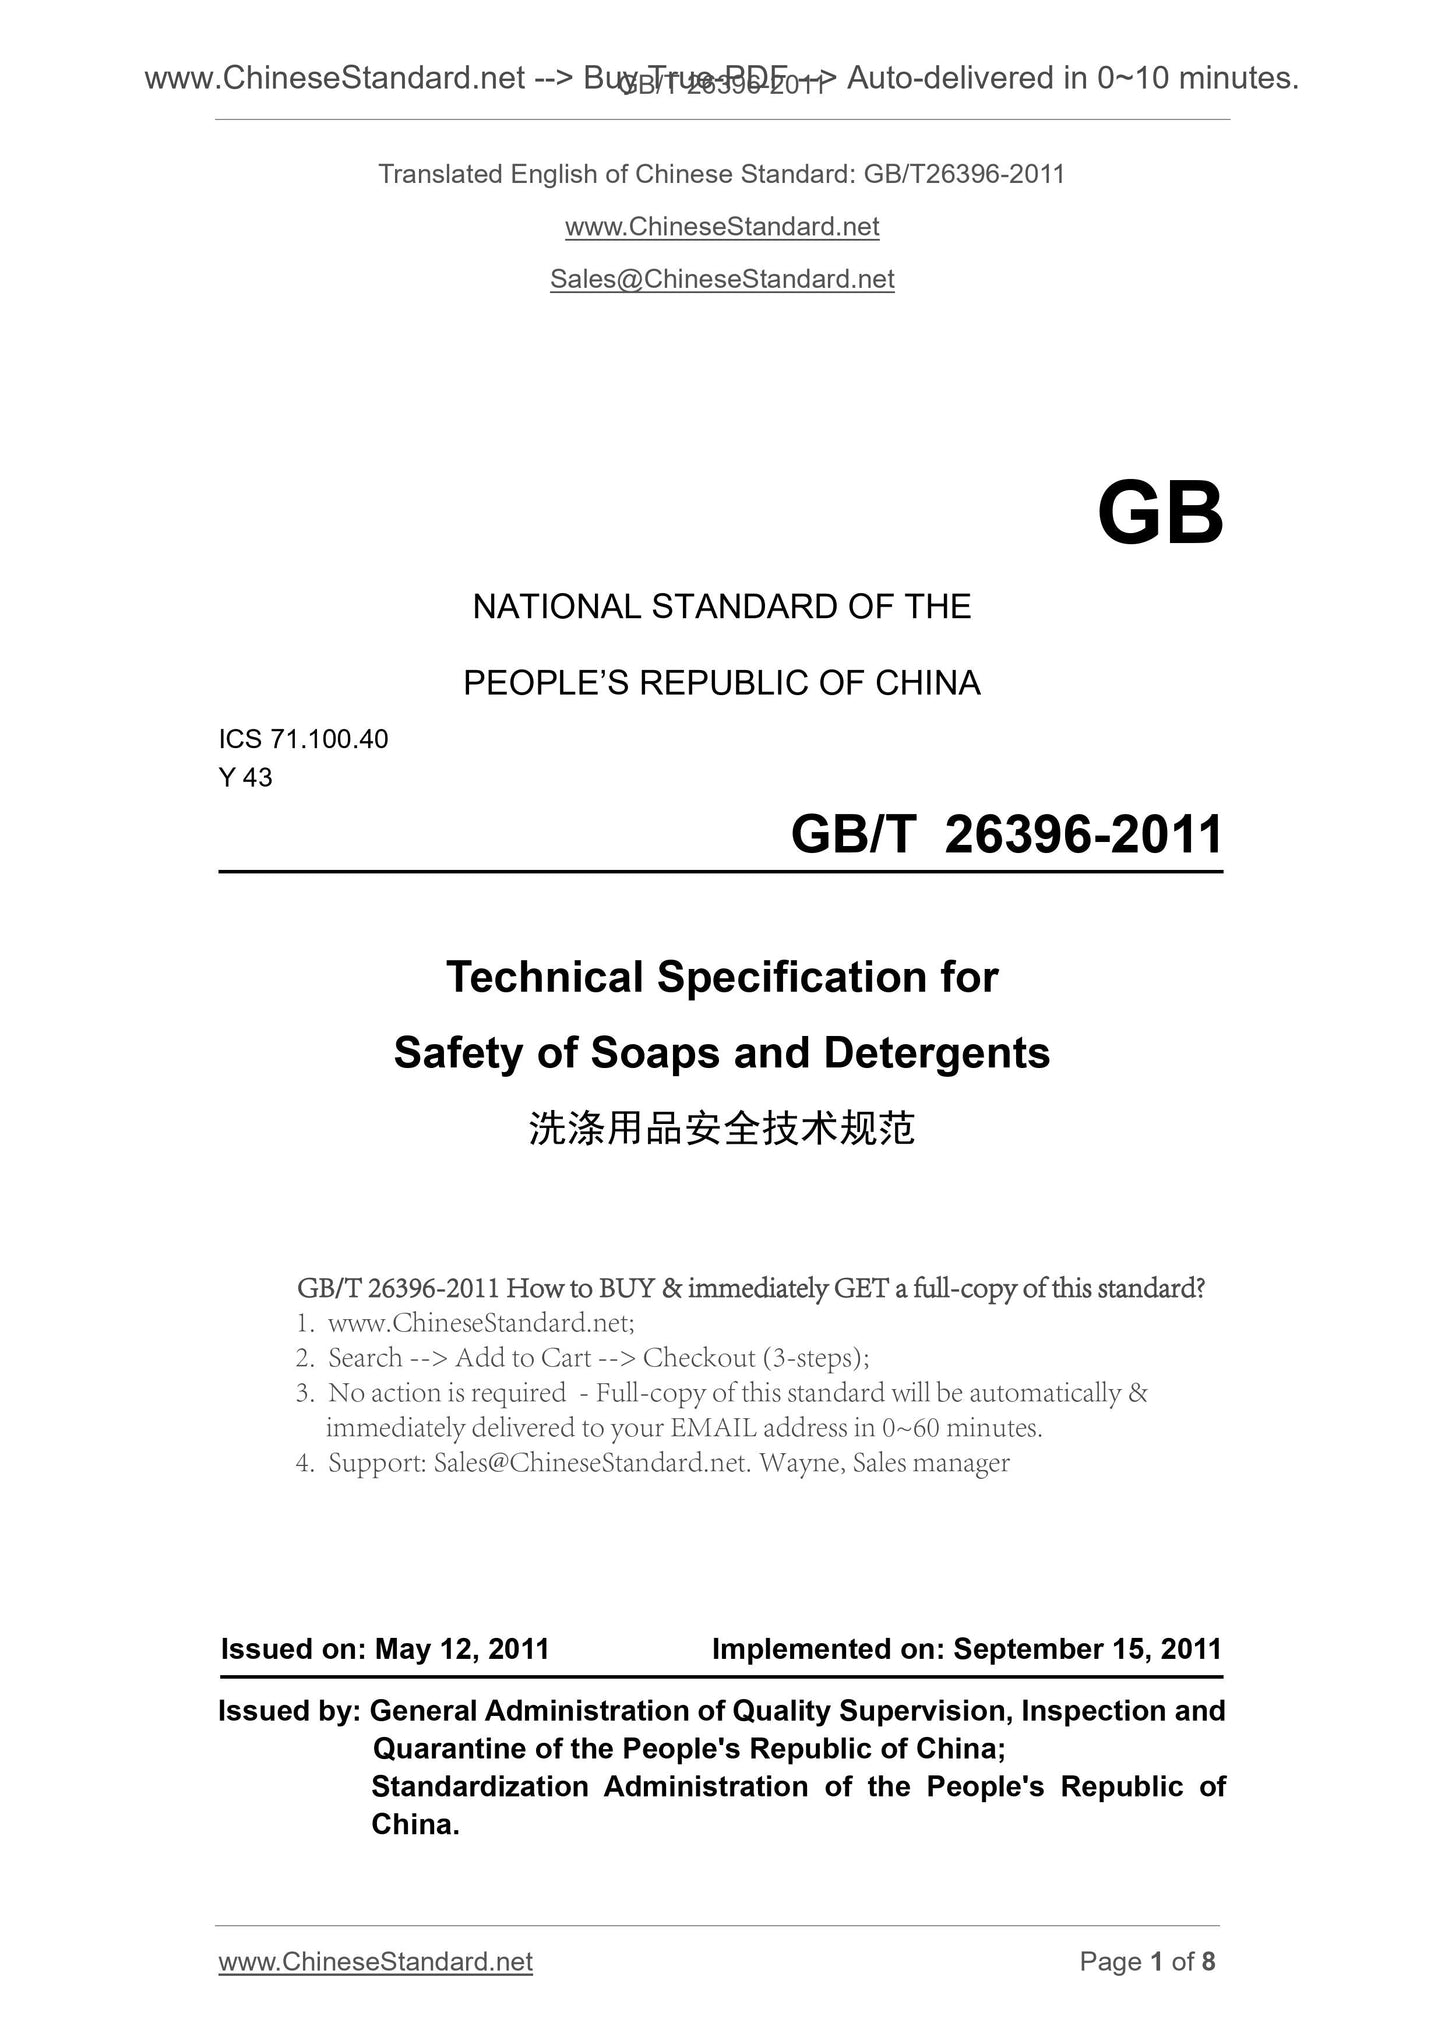 GB/T 26396-2011 Page 1